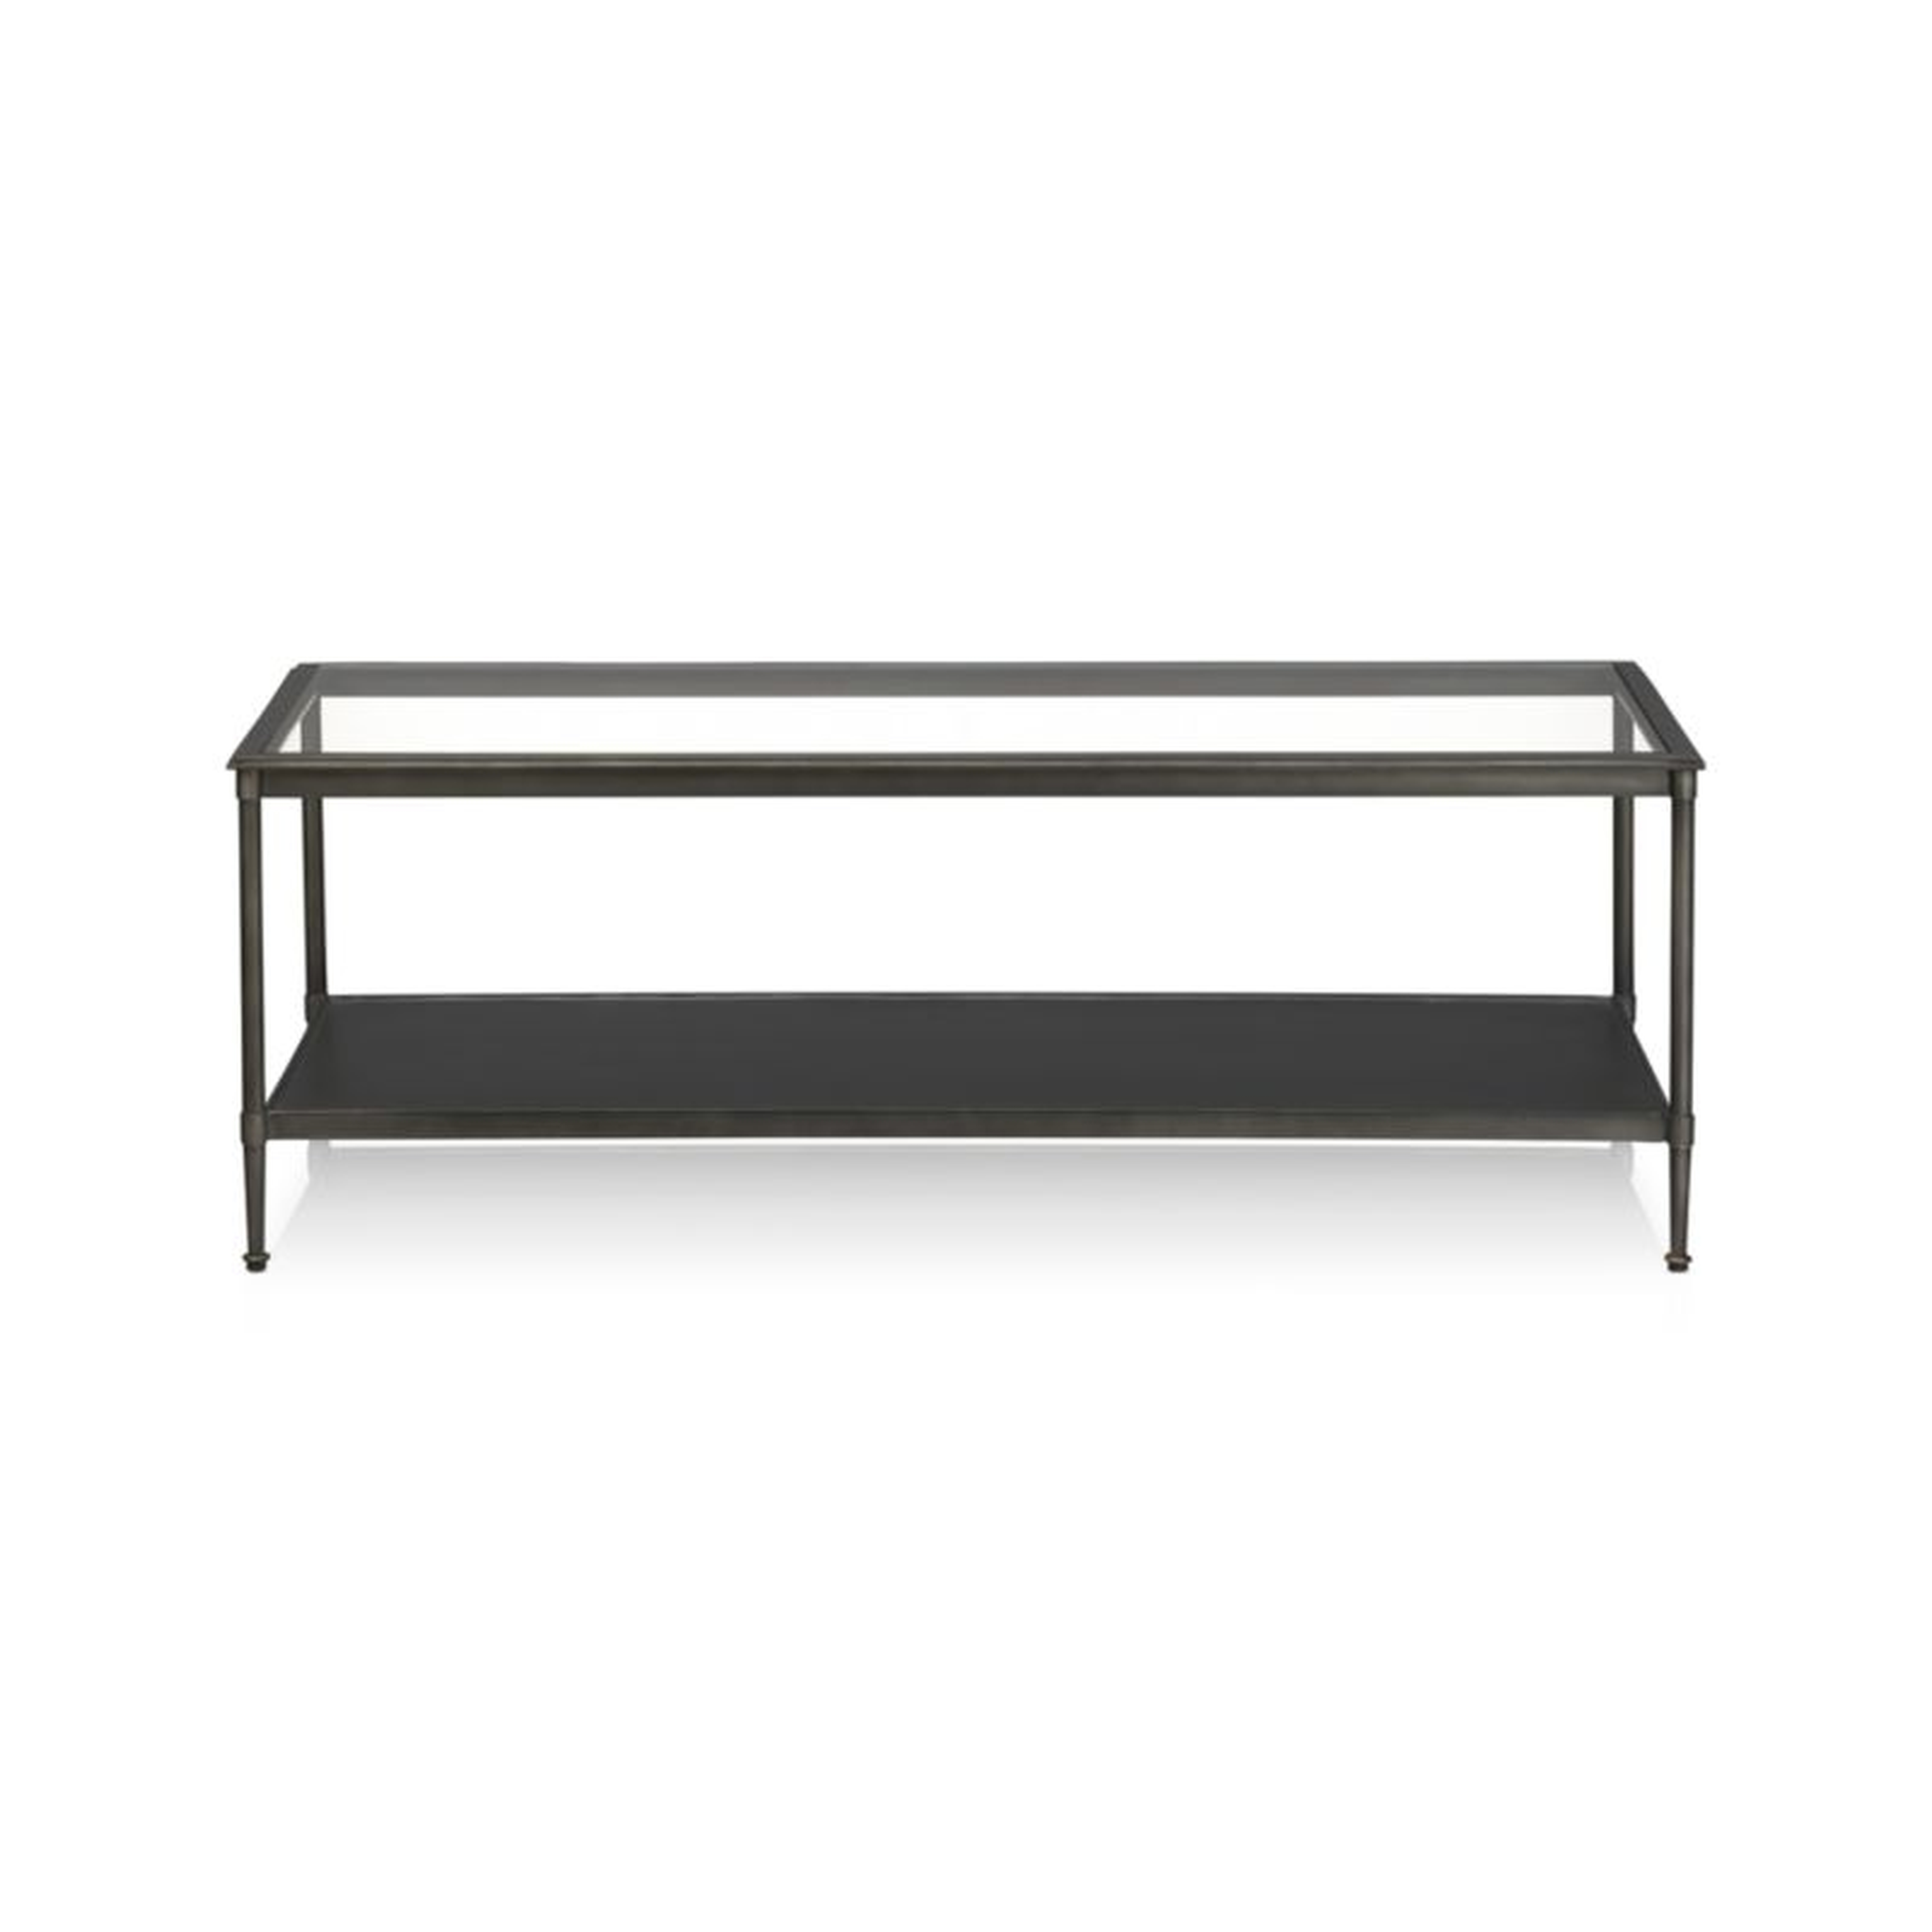 Kyra Coffee Table - Crate and Barrel